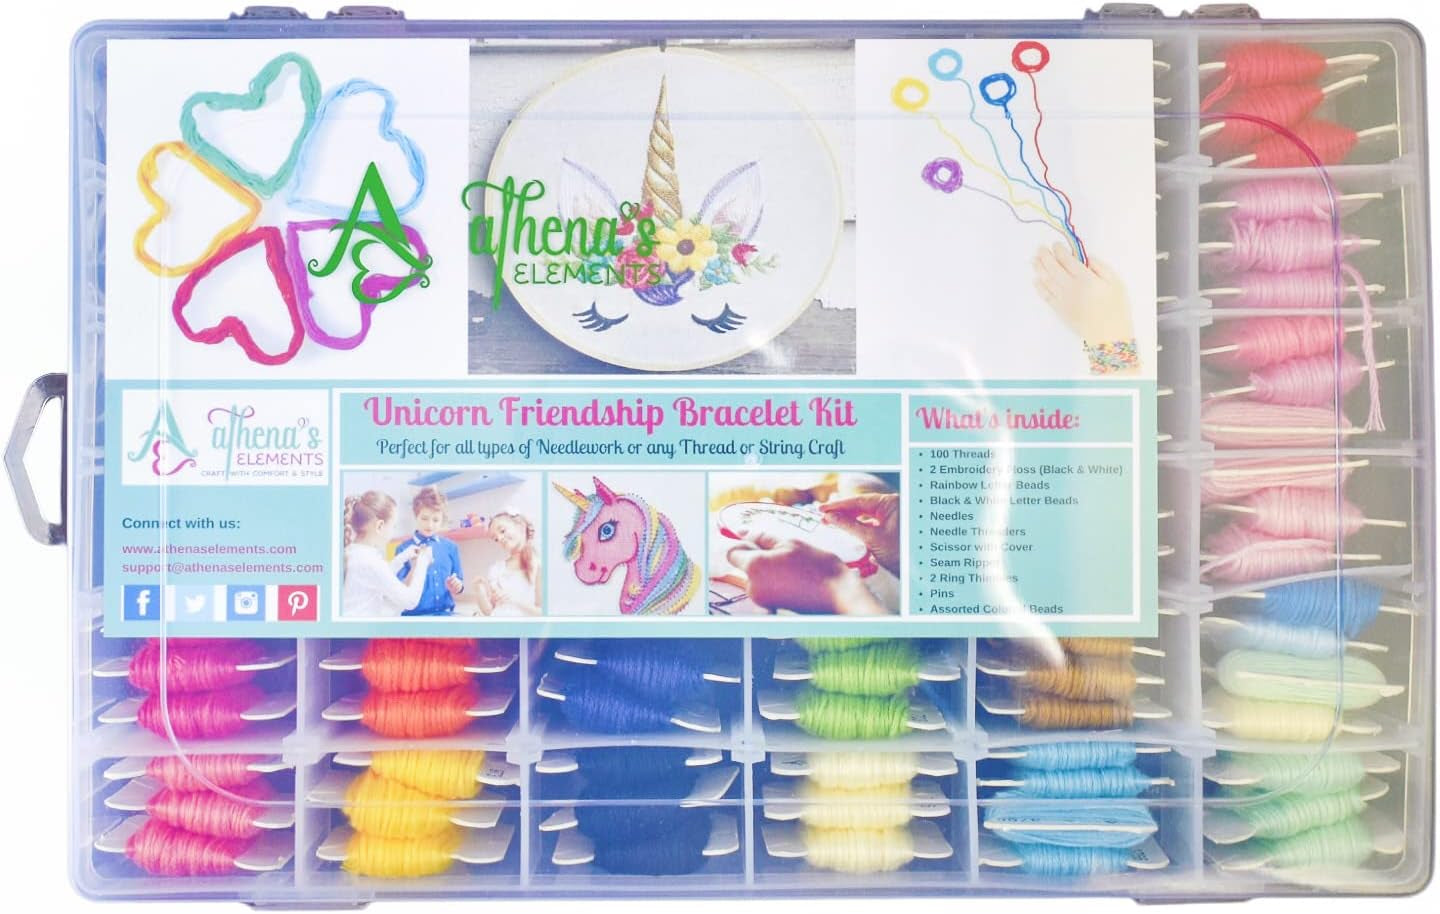 Embroidery Floss Friendship Bracelet String Kit - 276Pcs Thread and Accessories - Colors Are Labeled with Std Codes - Perfect Thread for Cross Stitch - Supplies